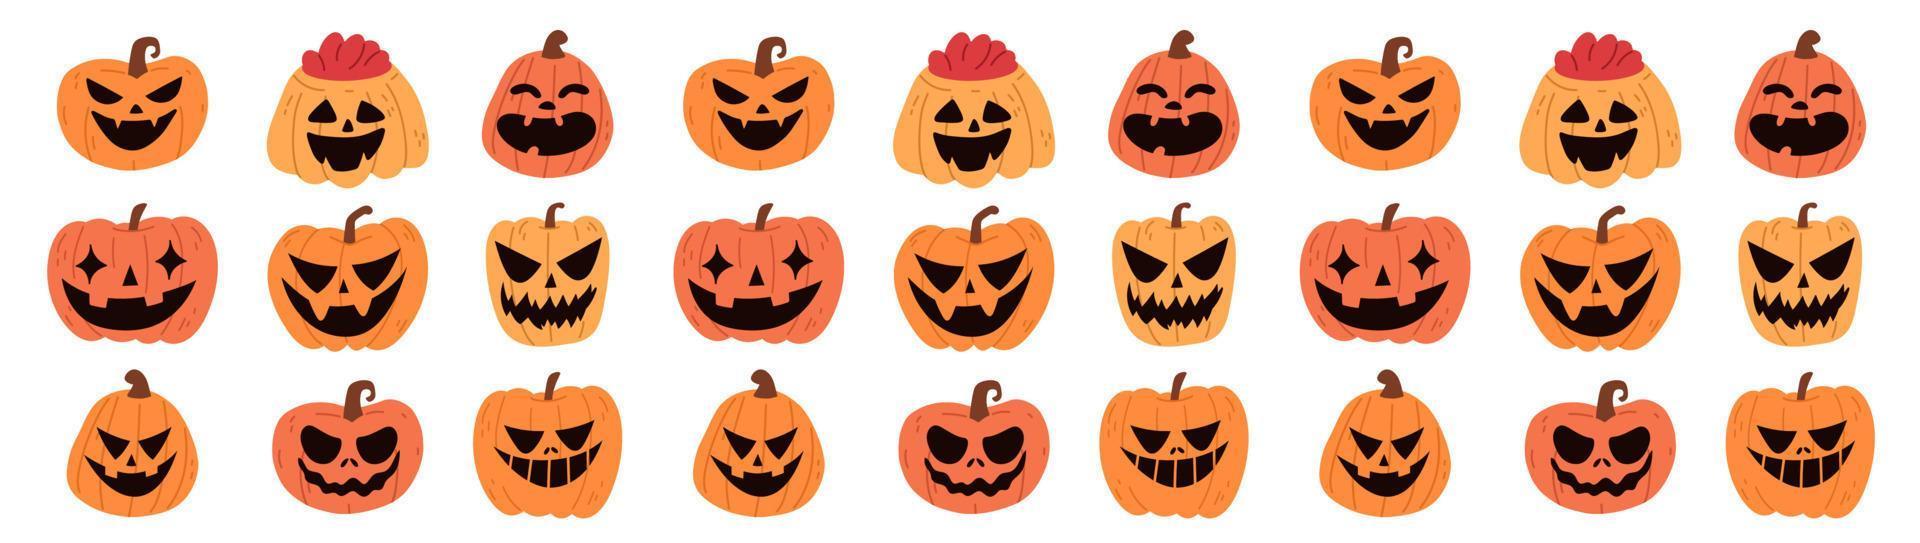 Happy Halloween banner with scary pumpkins. Row of orange pumpkins. Characters banner, scary squash lanterns silhouettes. Spooky funny jack-o-lanterns halloween poster vector background